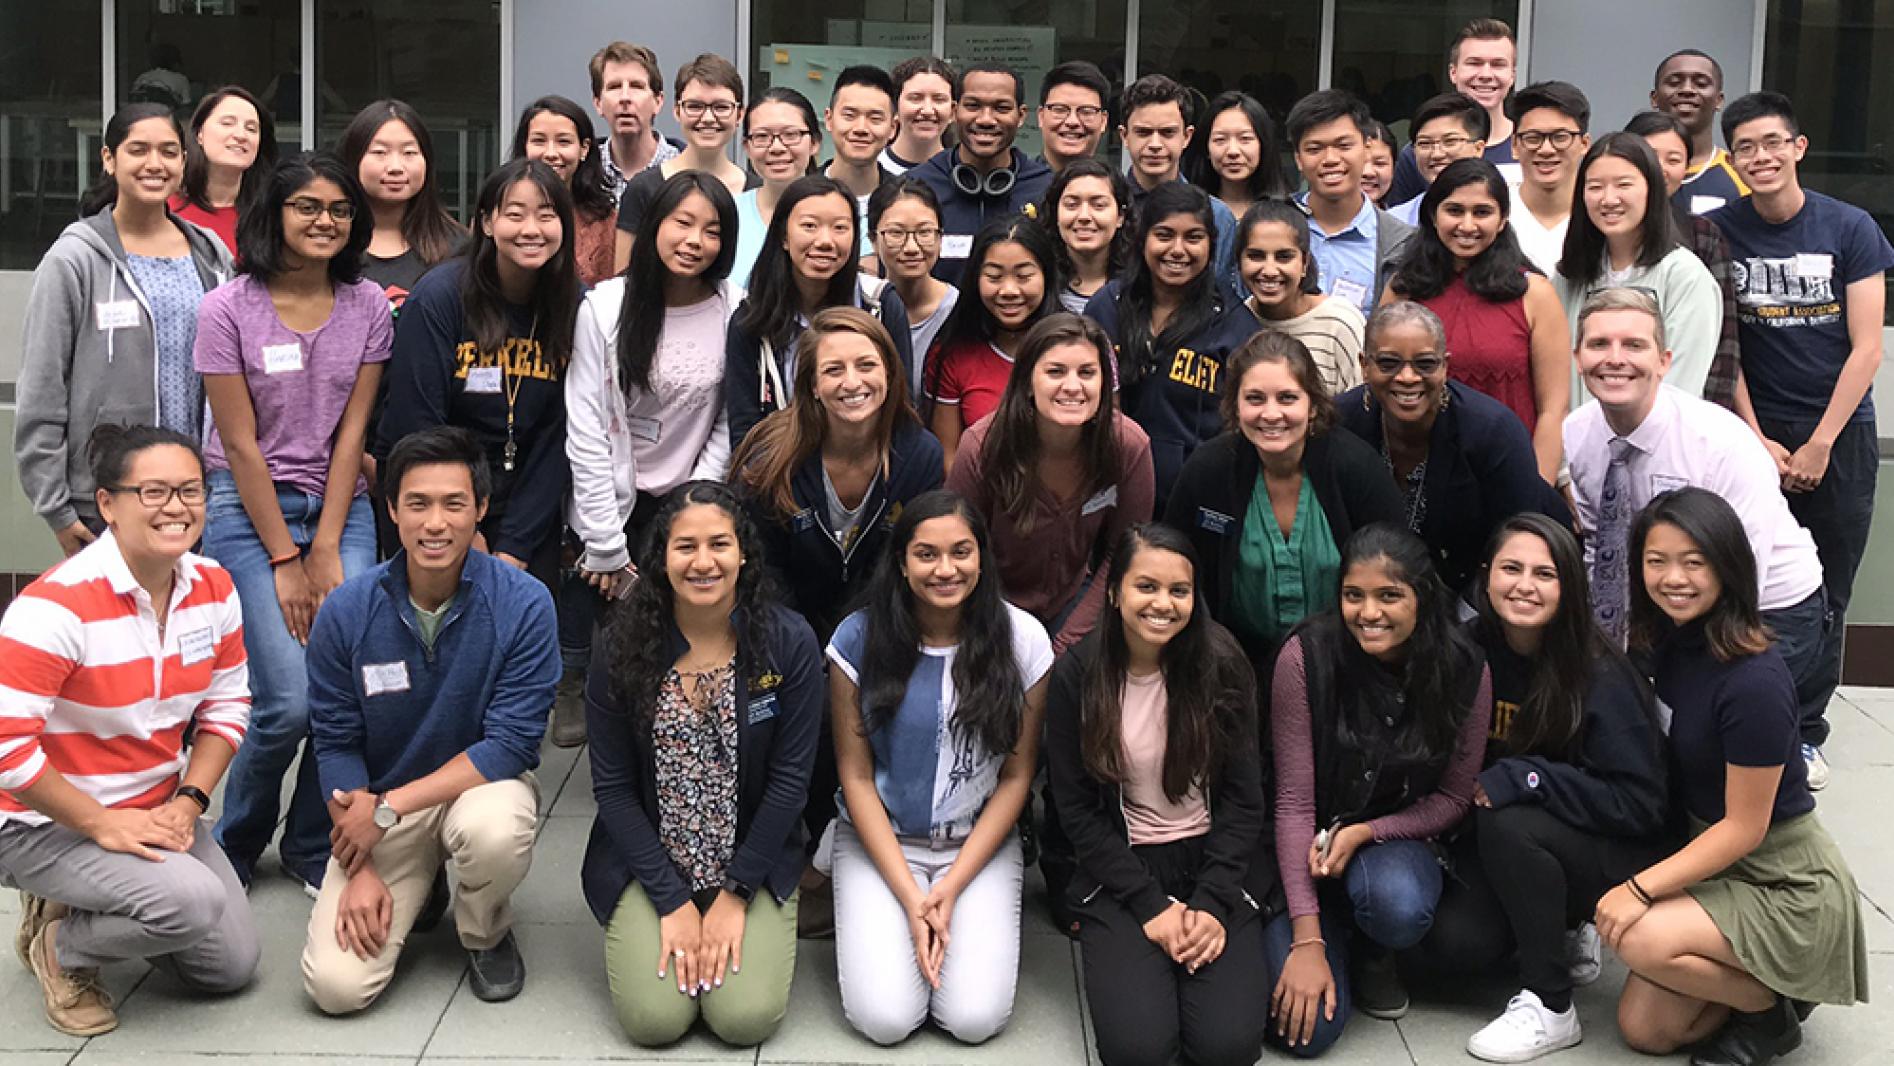 A group of 44 computer science scholars huddled together and smiling for a group photo outside of UC Berkeley's computer science building